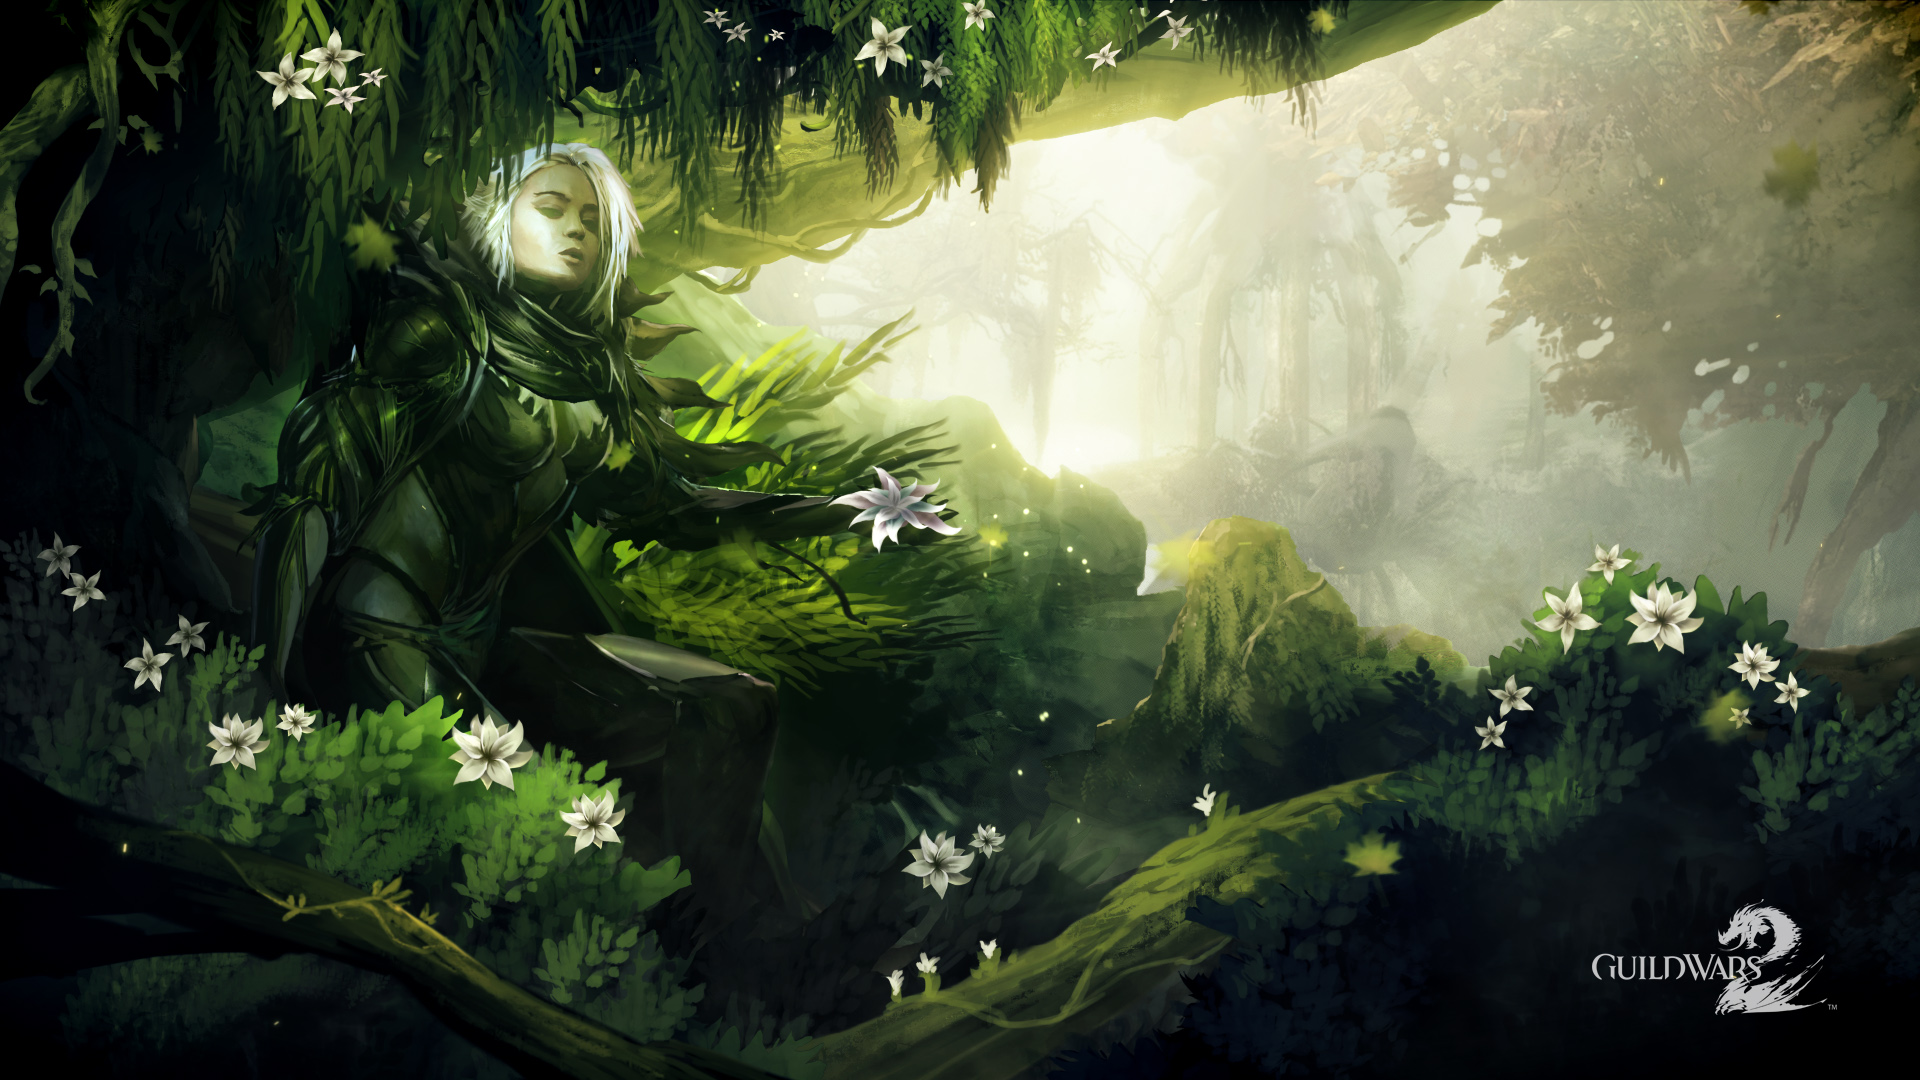 Download desktop wallpaper Art with the druid on the game Guild Wars 2